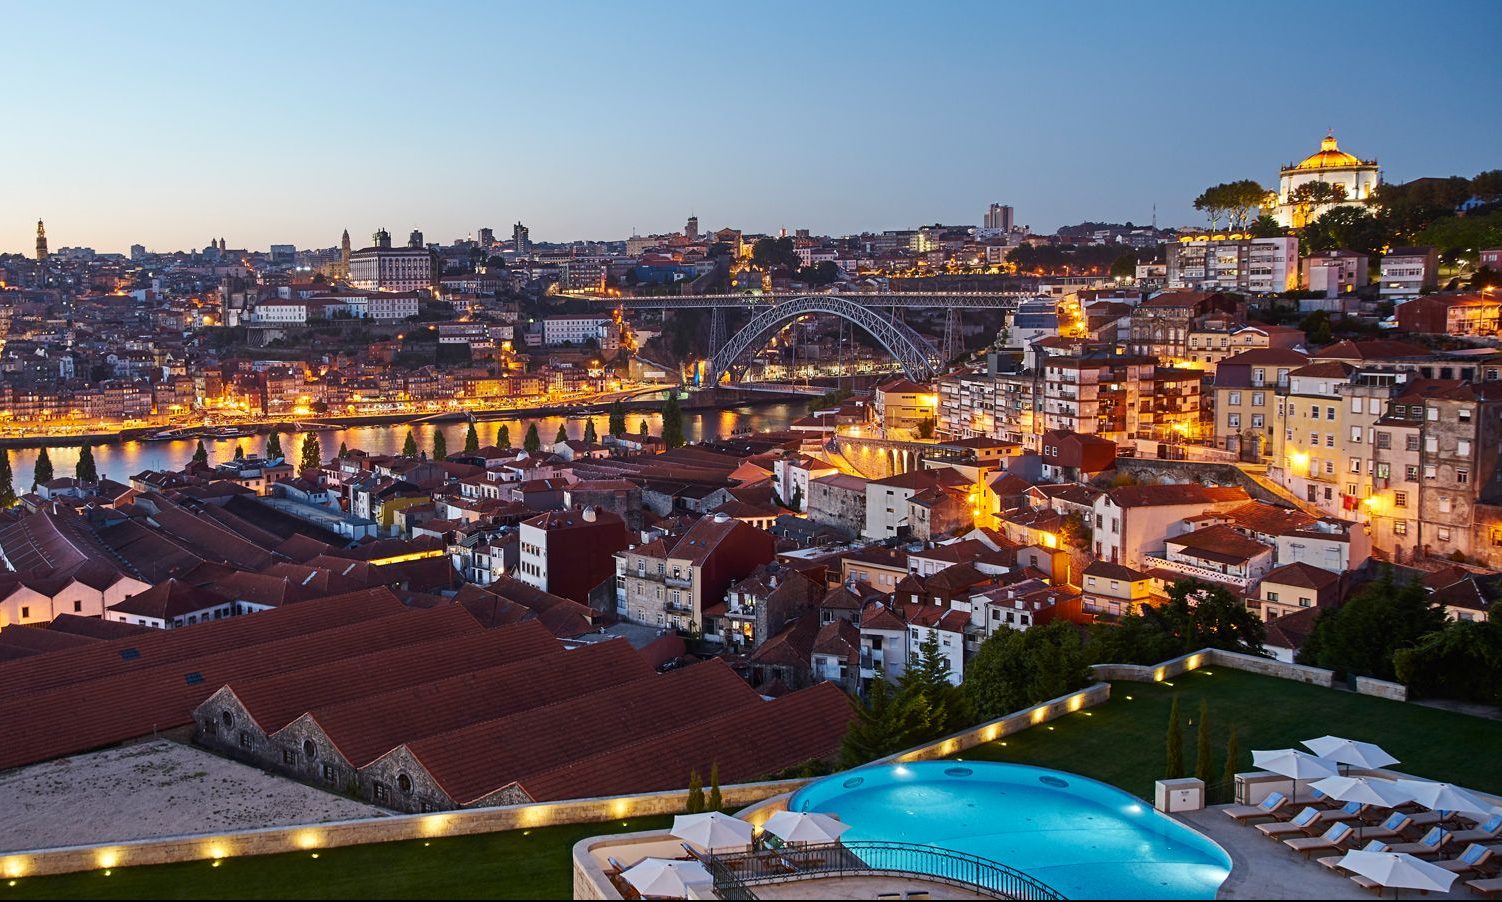 The Best Hotels in Porto According to Carlos Ferreira